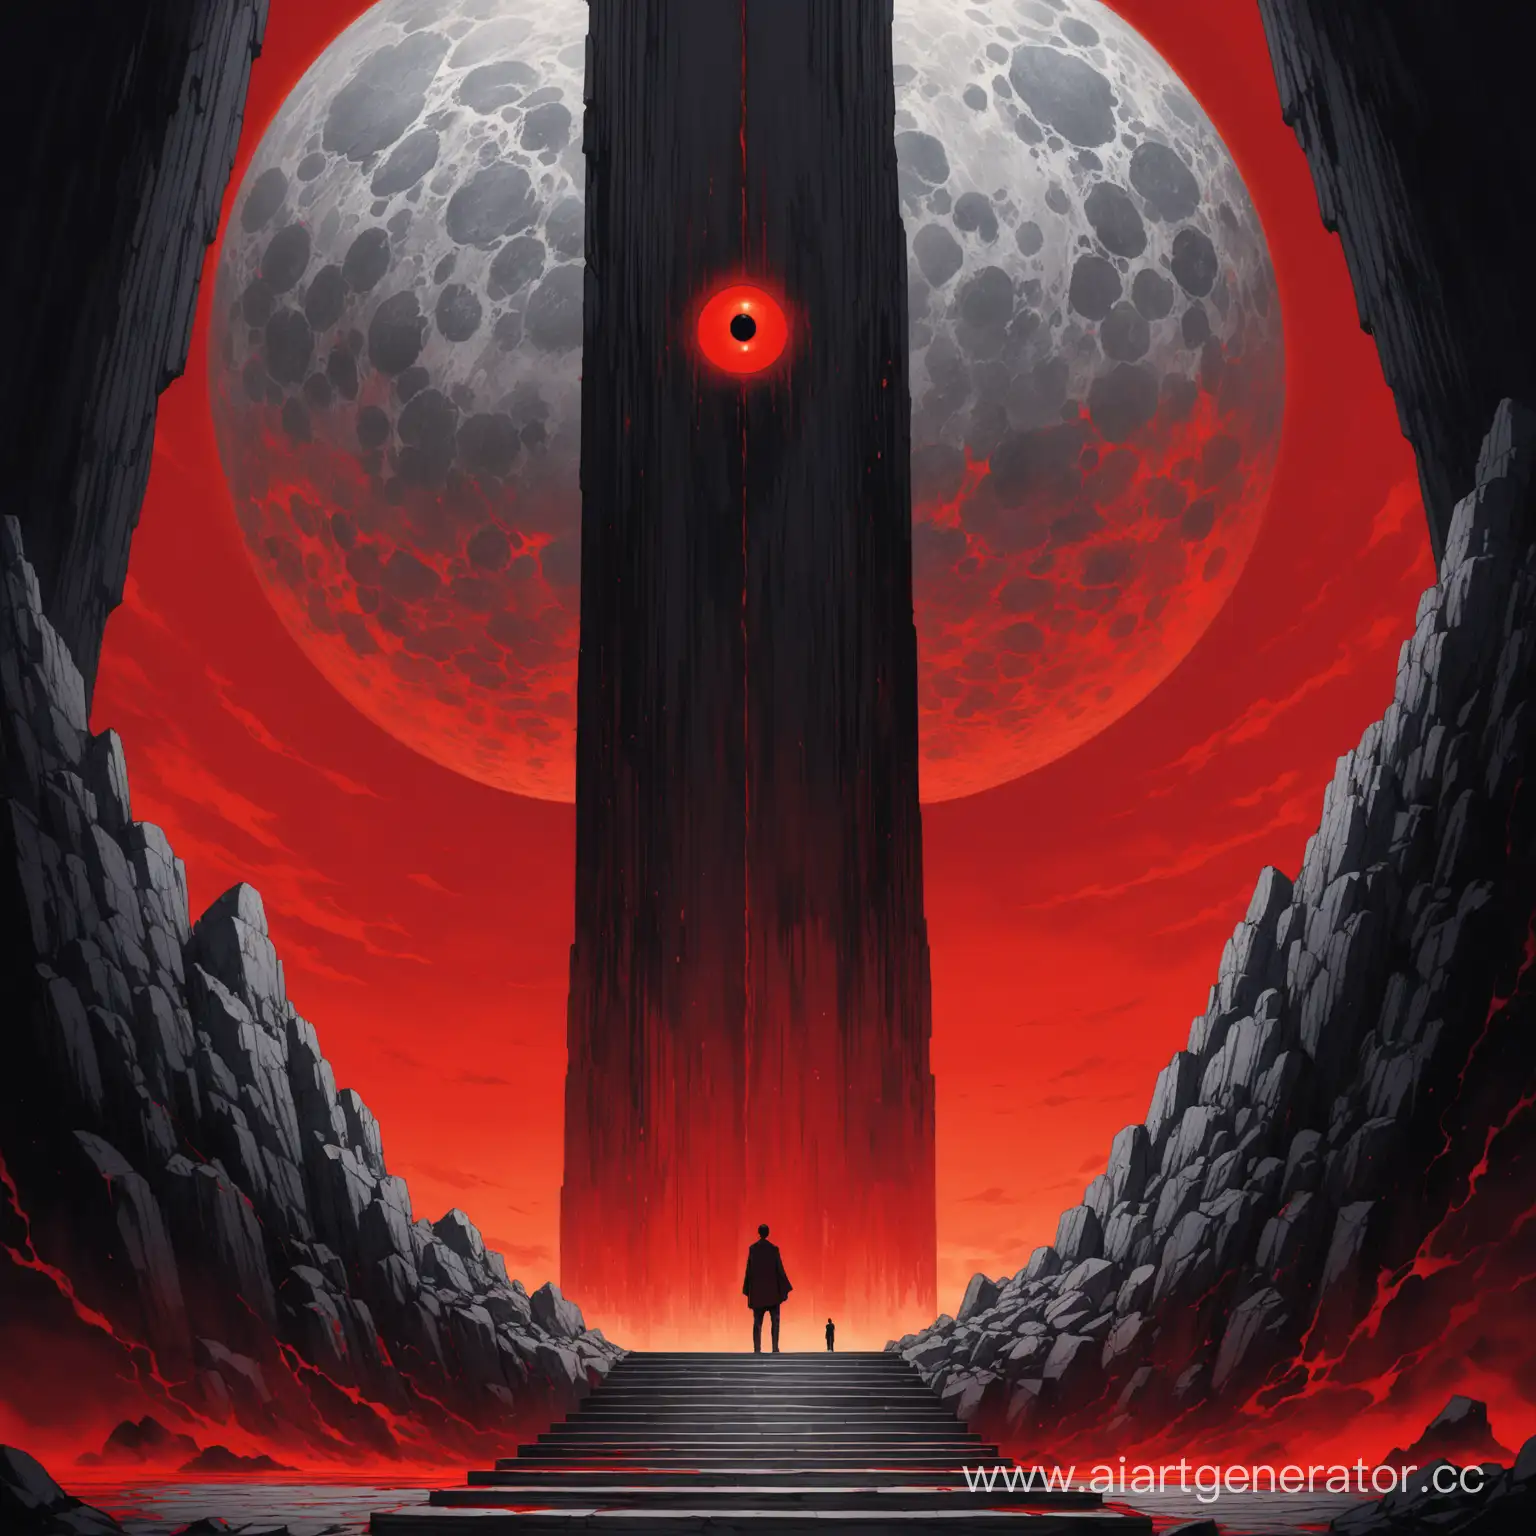 Mysterious-Man-by-SkyHigh-Granite-Pillars-and-a-BloodRed-Eye